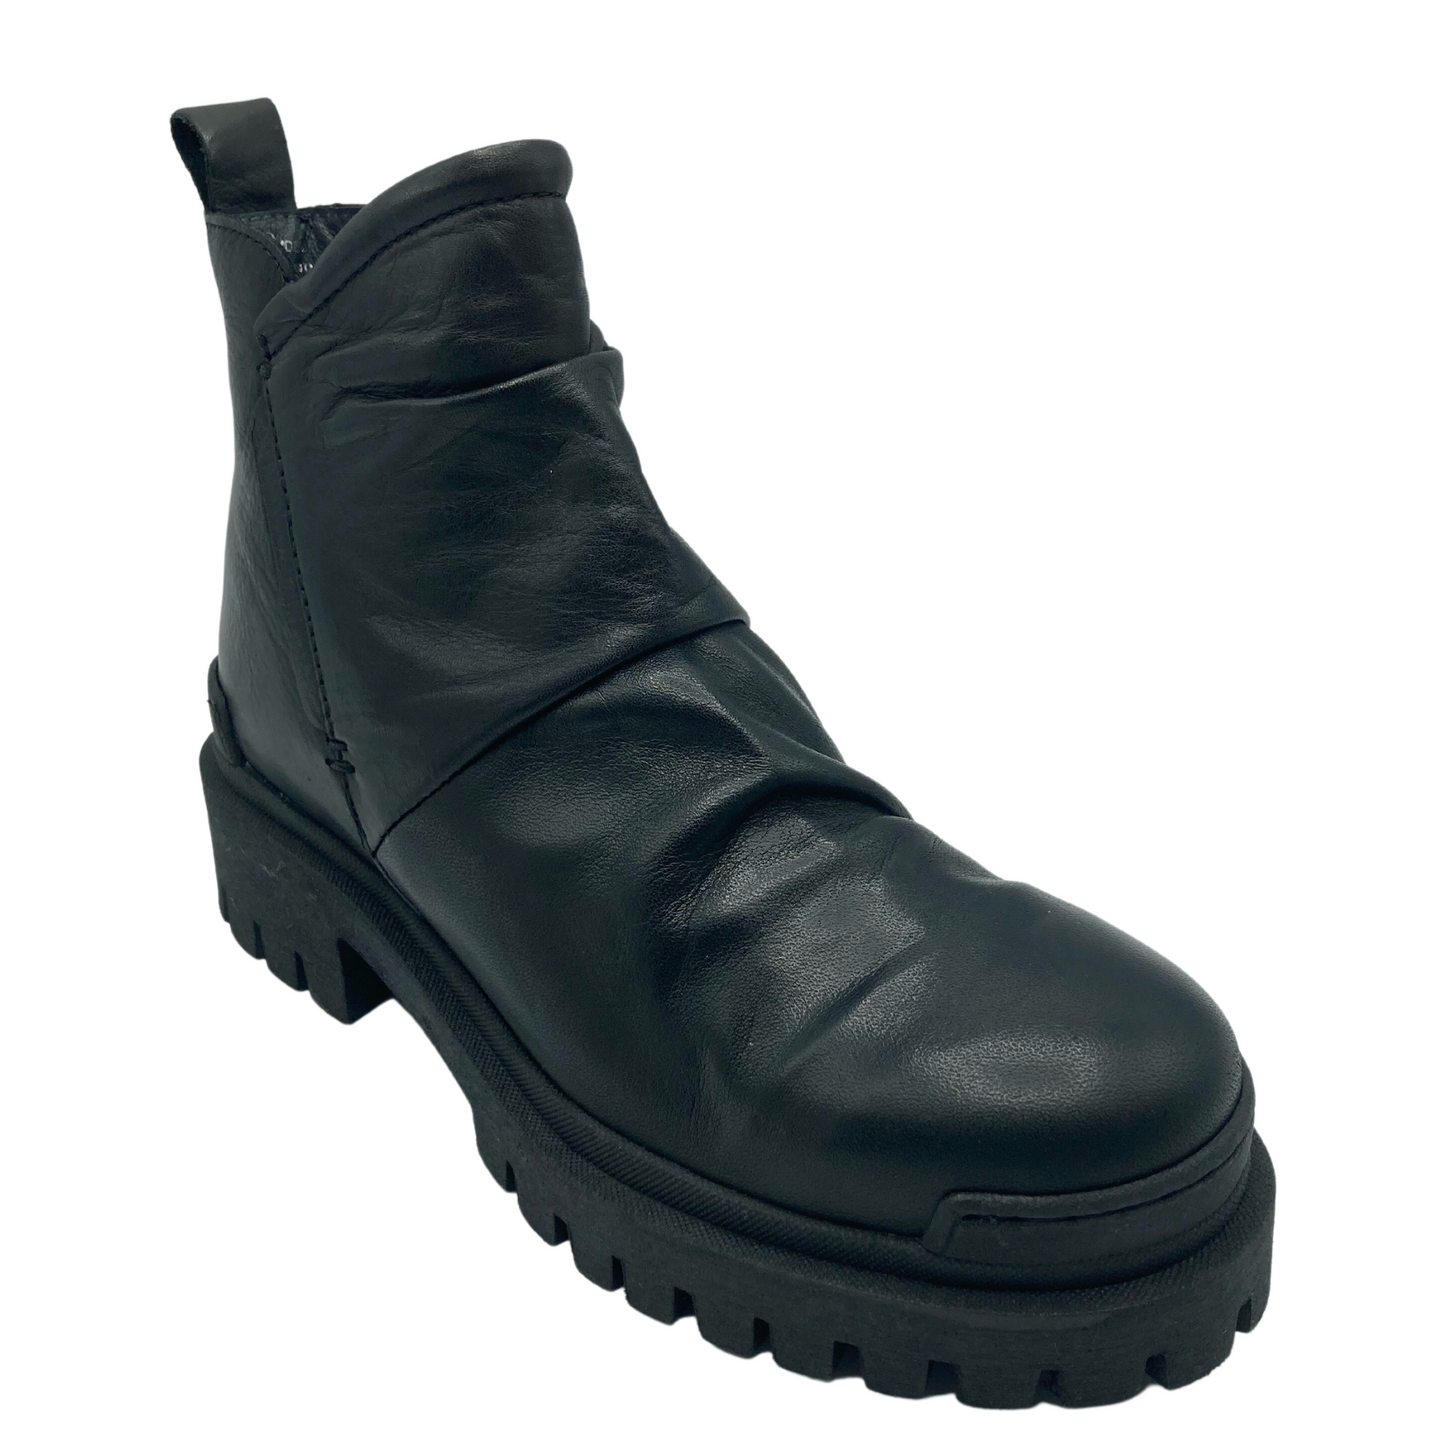 45 degree angled view of short leather boot with rounded toe and rubber outsole